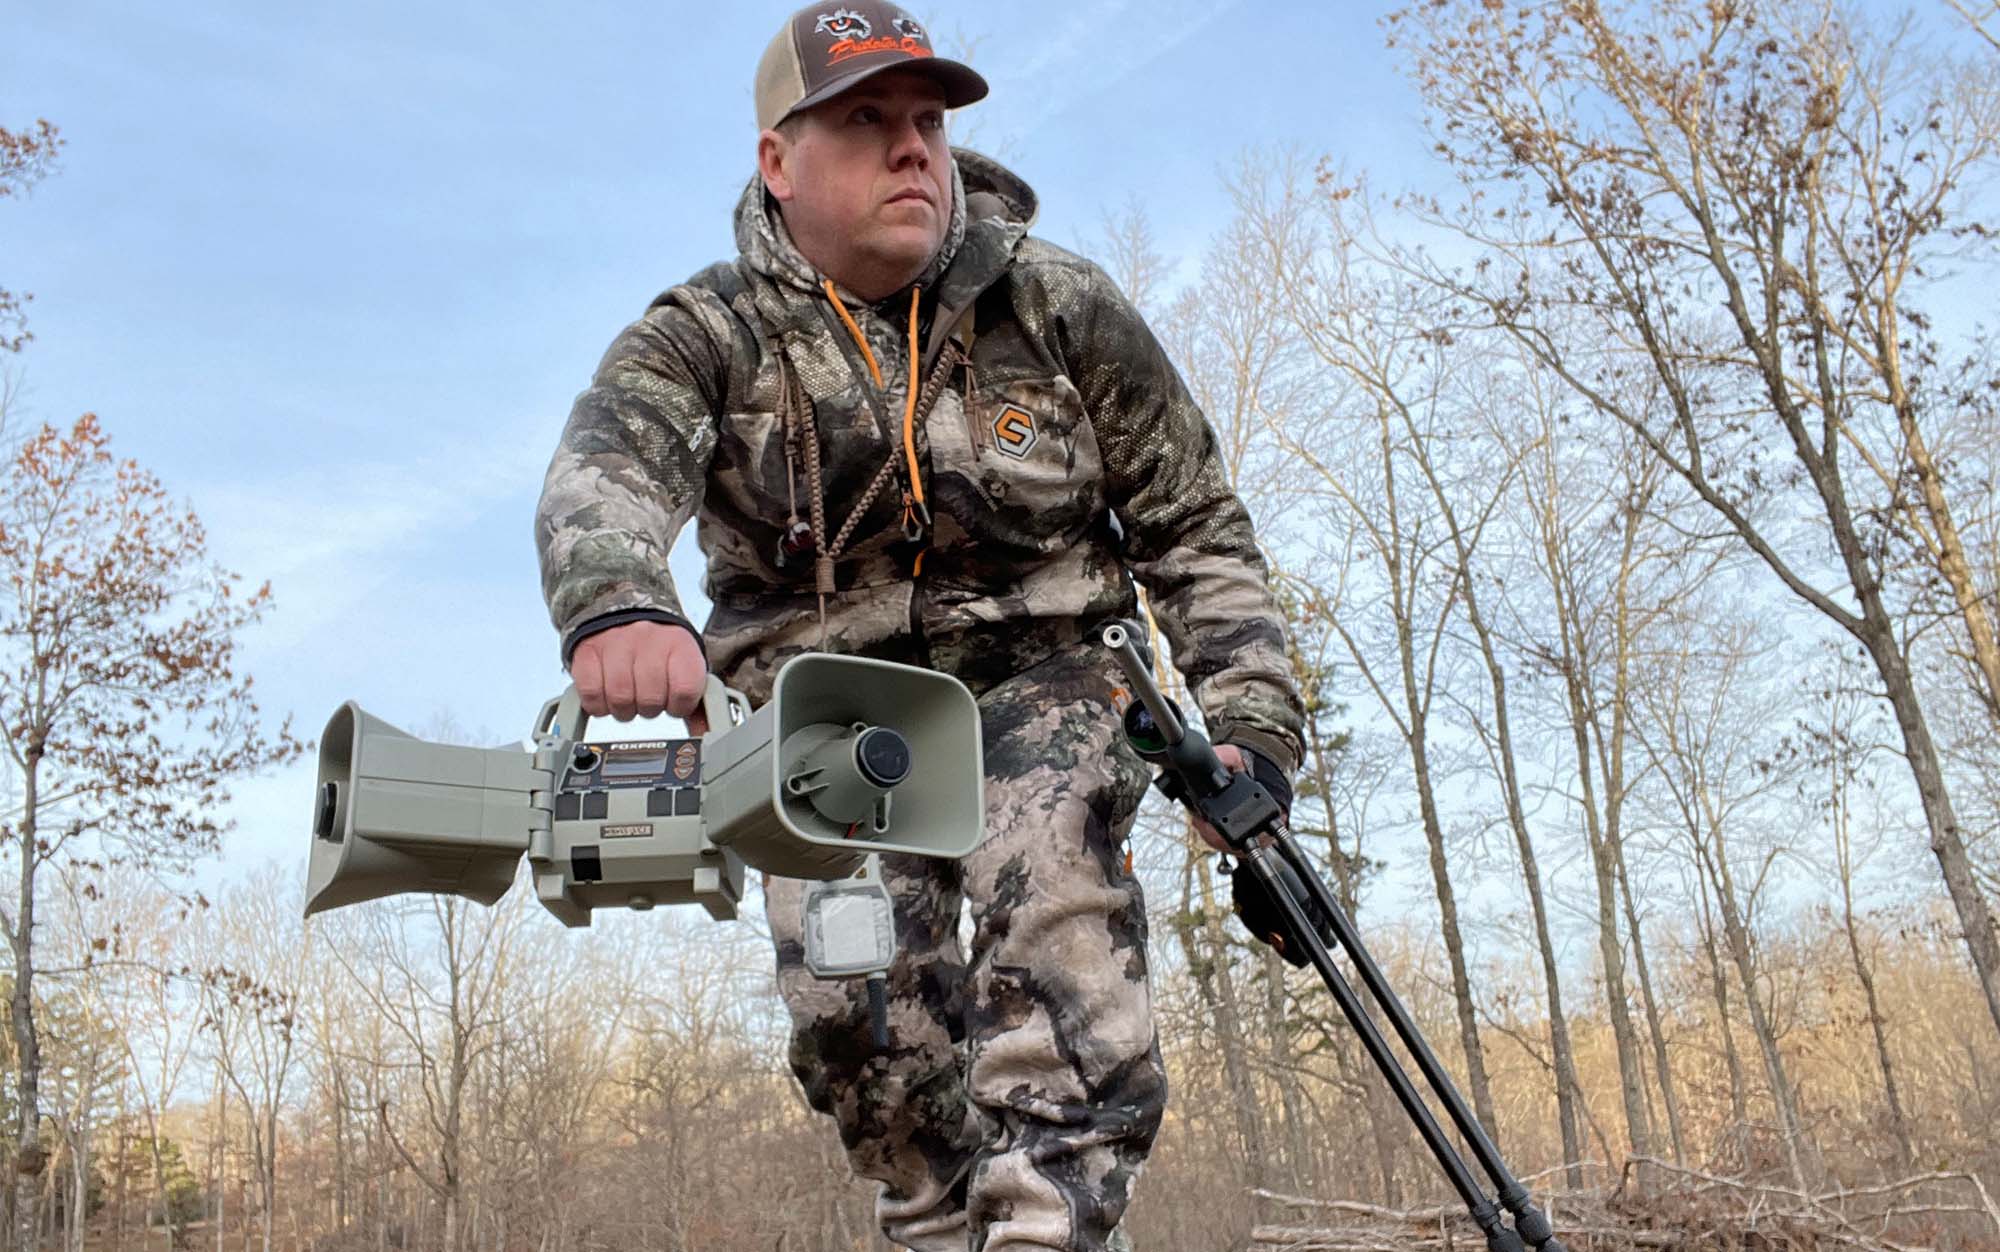 Hunter carrying the FOXPRO XWAVE coyote call through the woods.